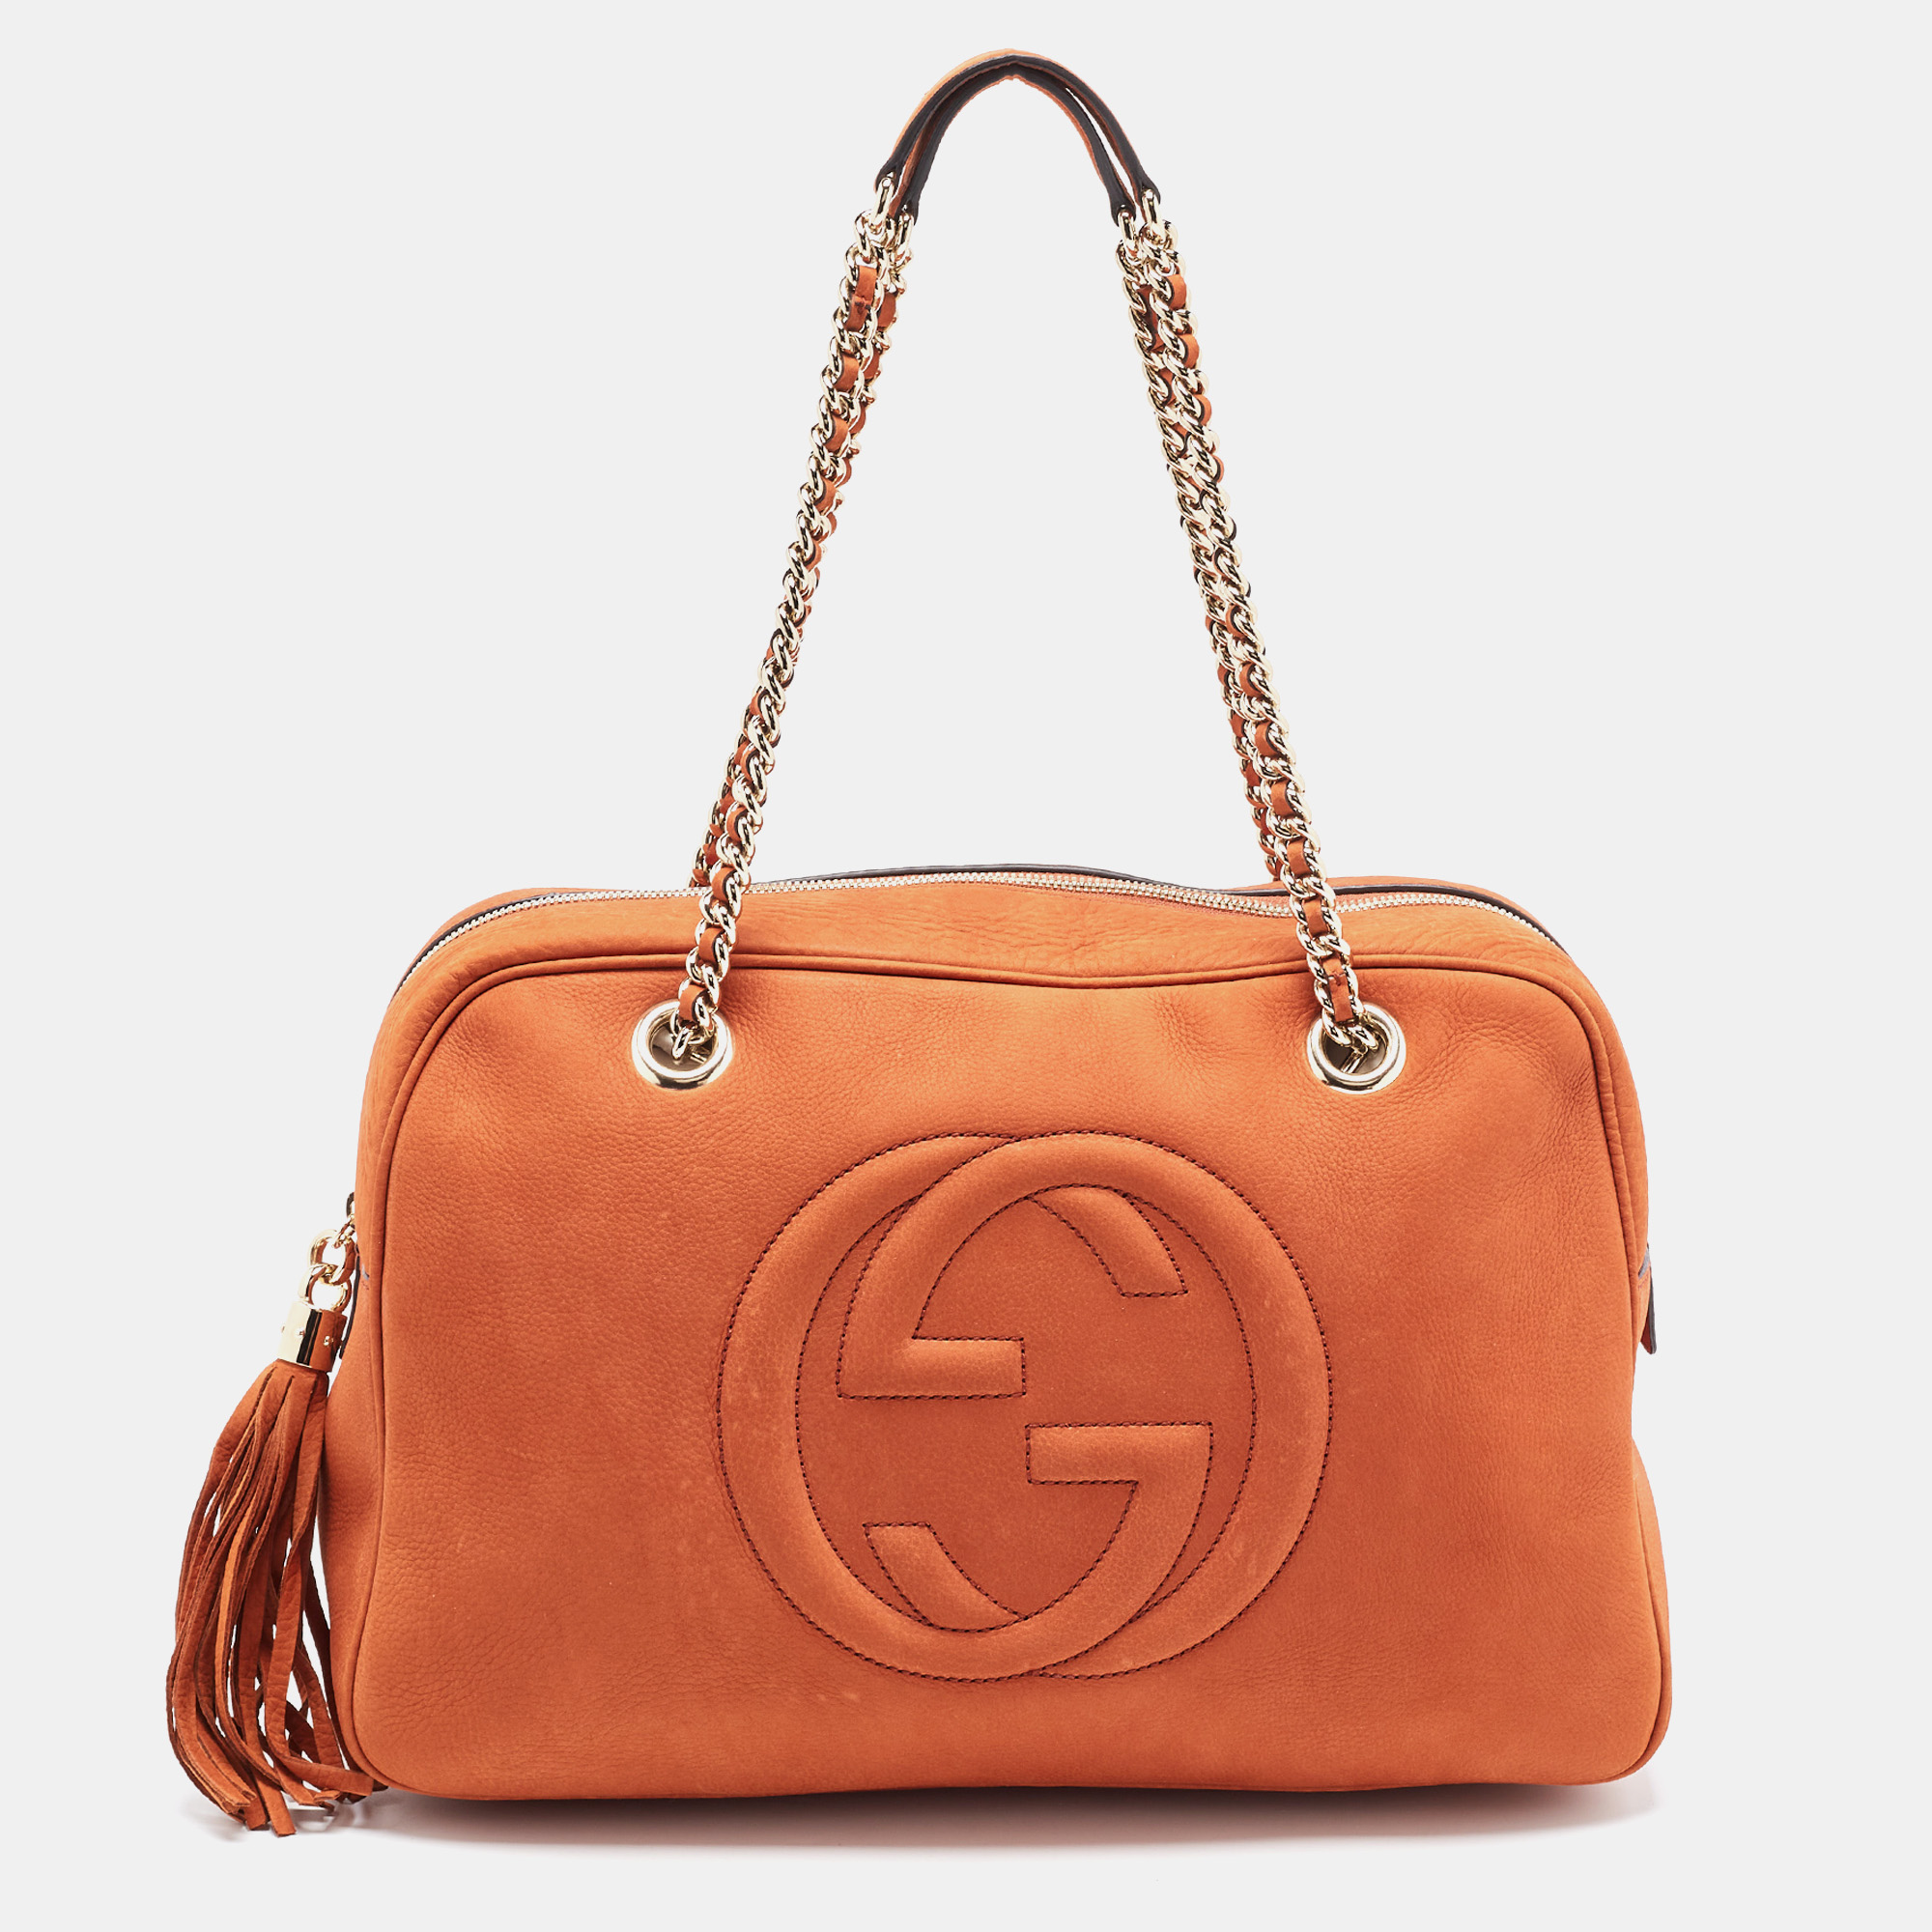 Indulge in luxury with this Gucci Soho bag. Meticulously crafted from premium materials it combines exquisite design impeccable craftsmanship and timeless elegance. Elevate your style with this fashion accessory.